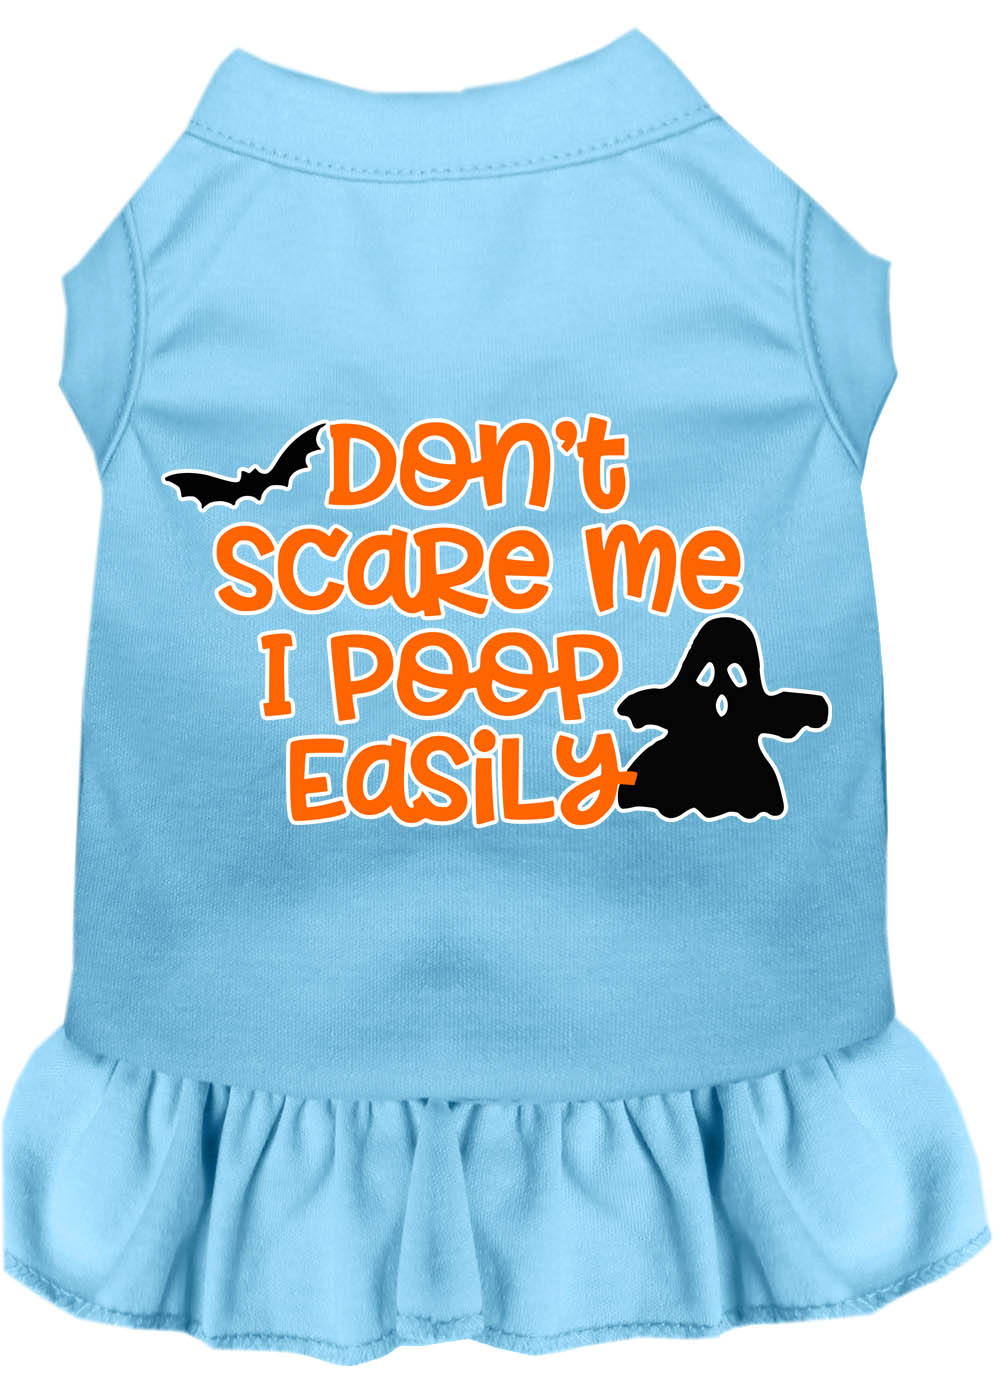 Don't Scare Me, Poops Easily Screen Print Dog Dress Baby Blue XL